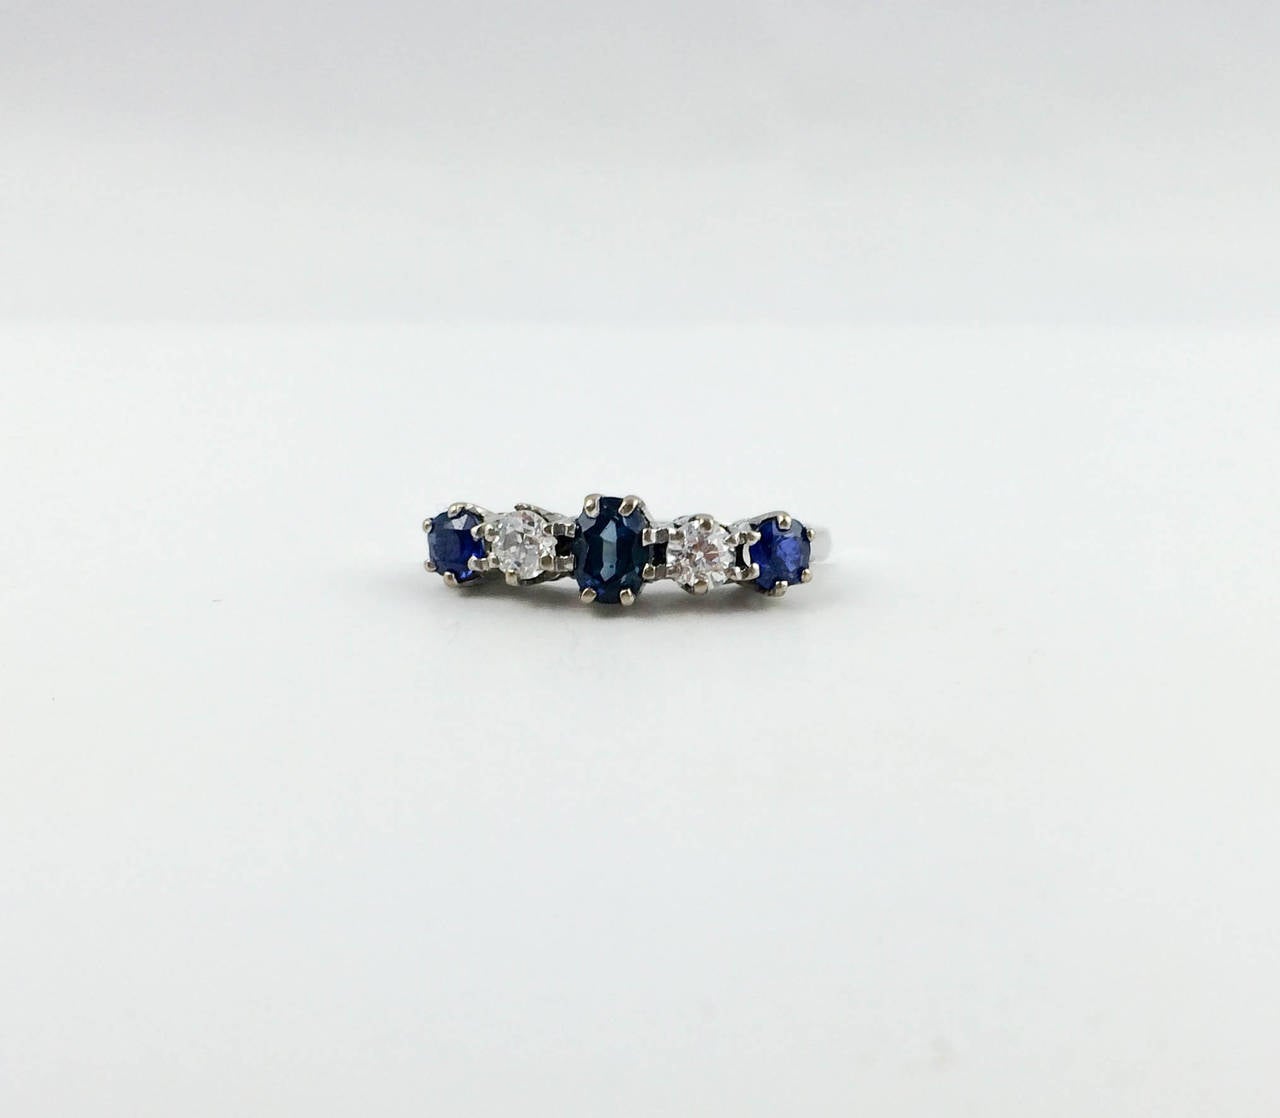 Stylish Vintage Platinum, Sapphire and Diamond Ring. This 5 stone ring features 2 diamonds and 3 sapphires on platinum. Great design and beautiful piece of jewellery.

 

Period: 1930s

Origin: England

Materials: Platinum, Diamonds and